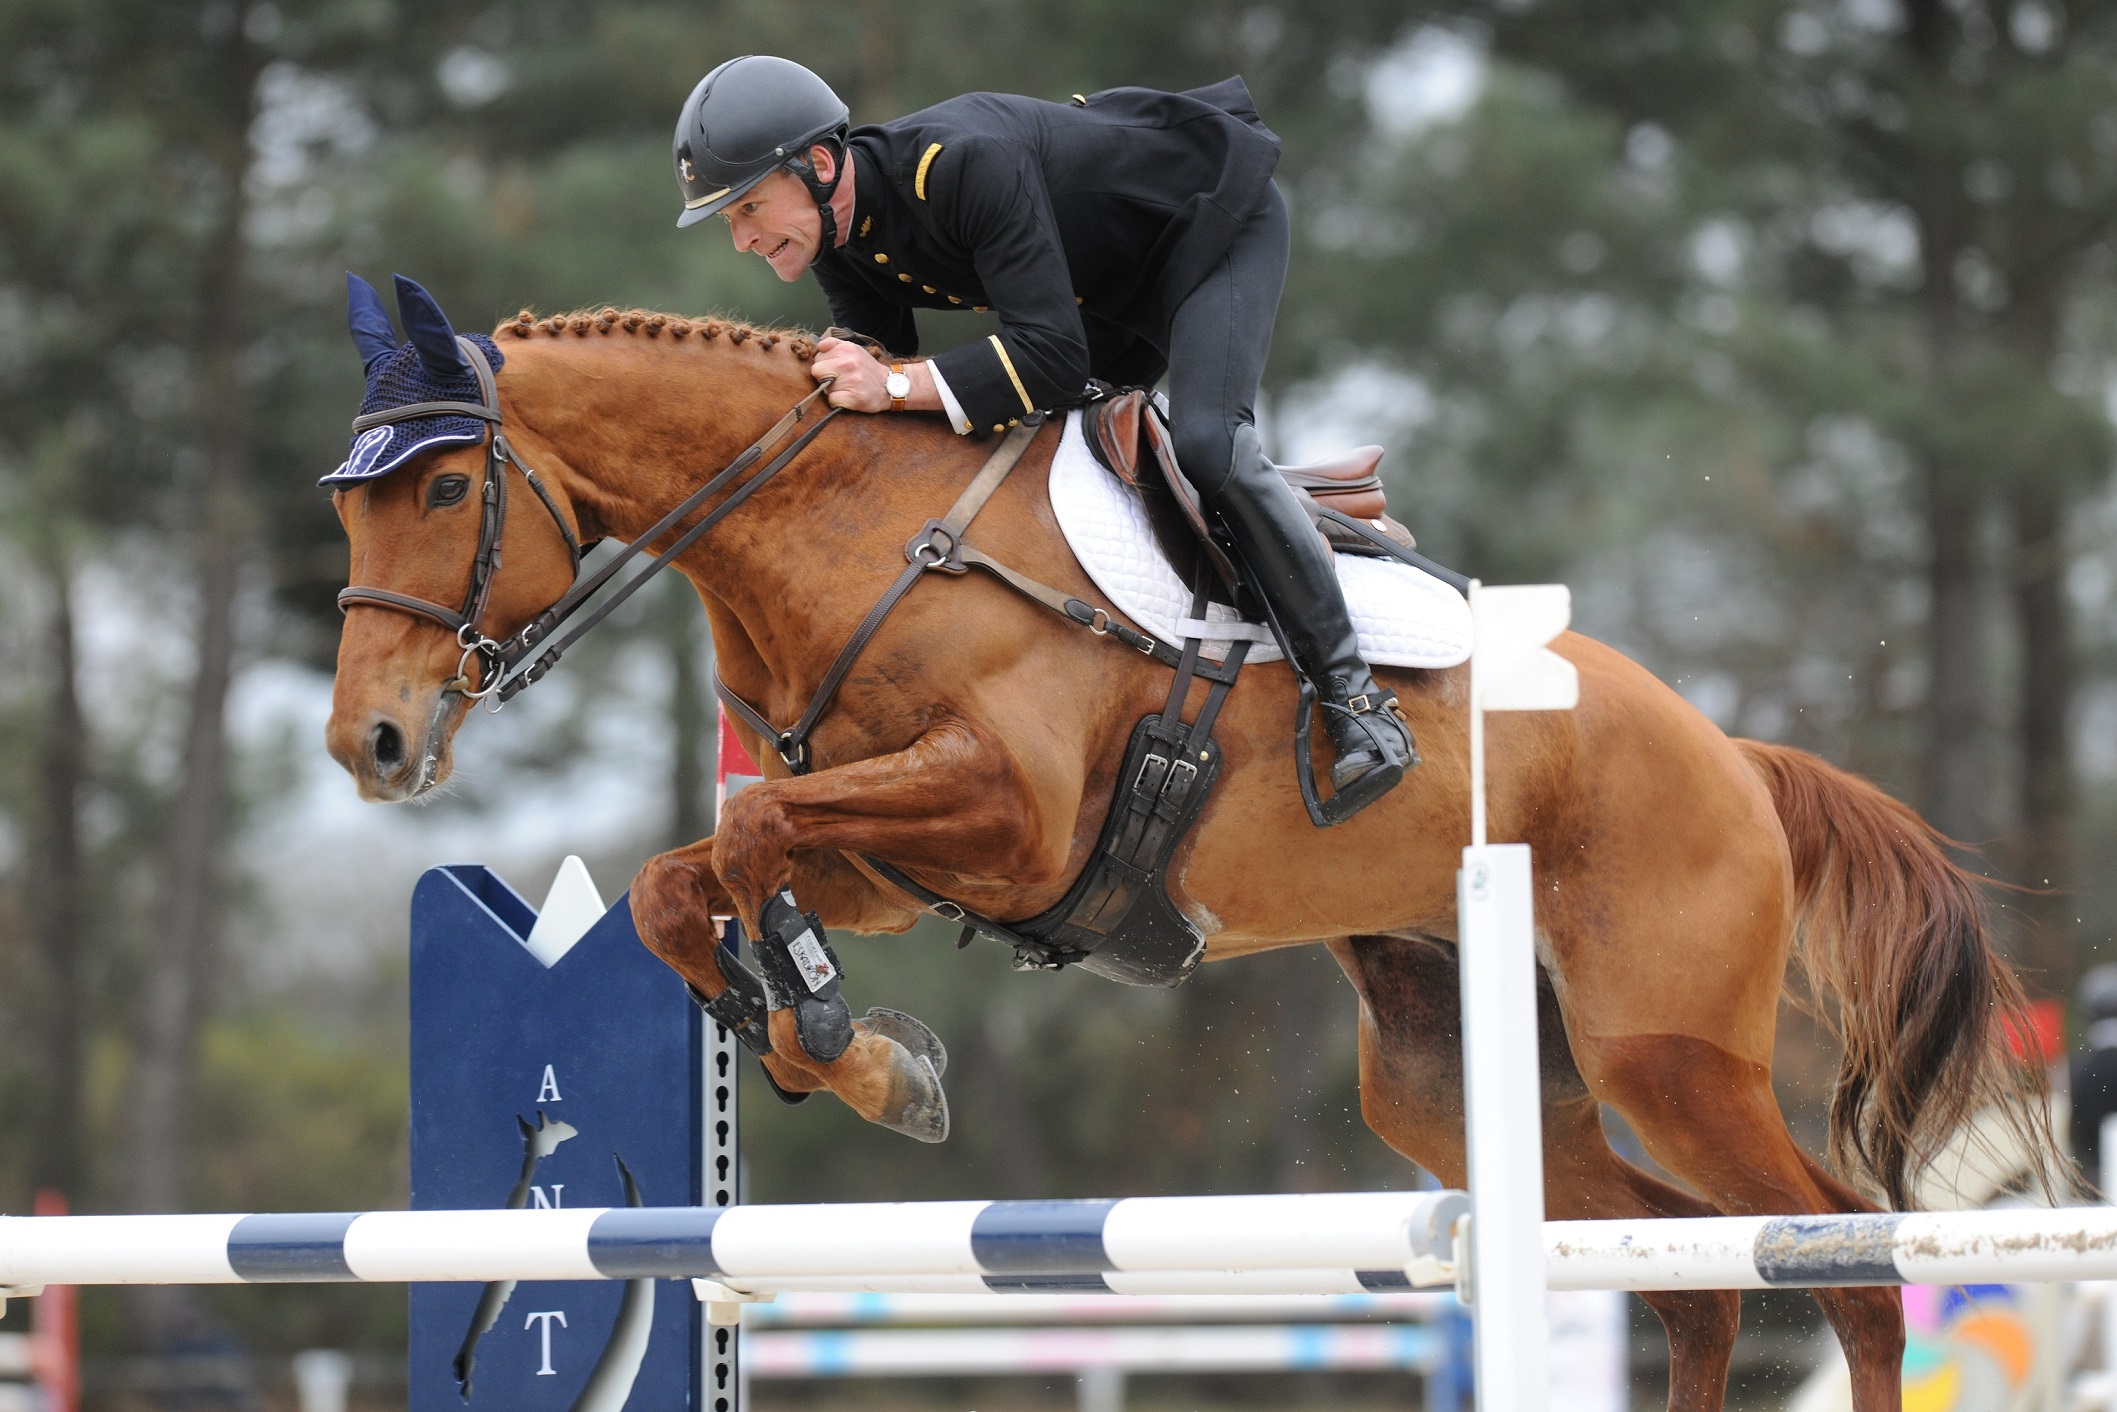 Directory of showjumping sessions